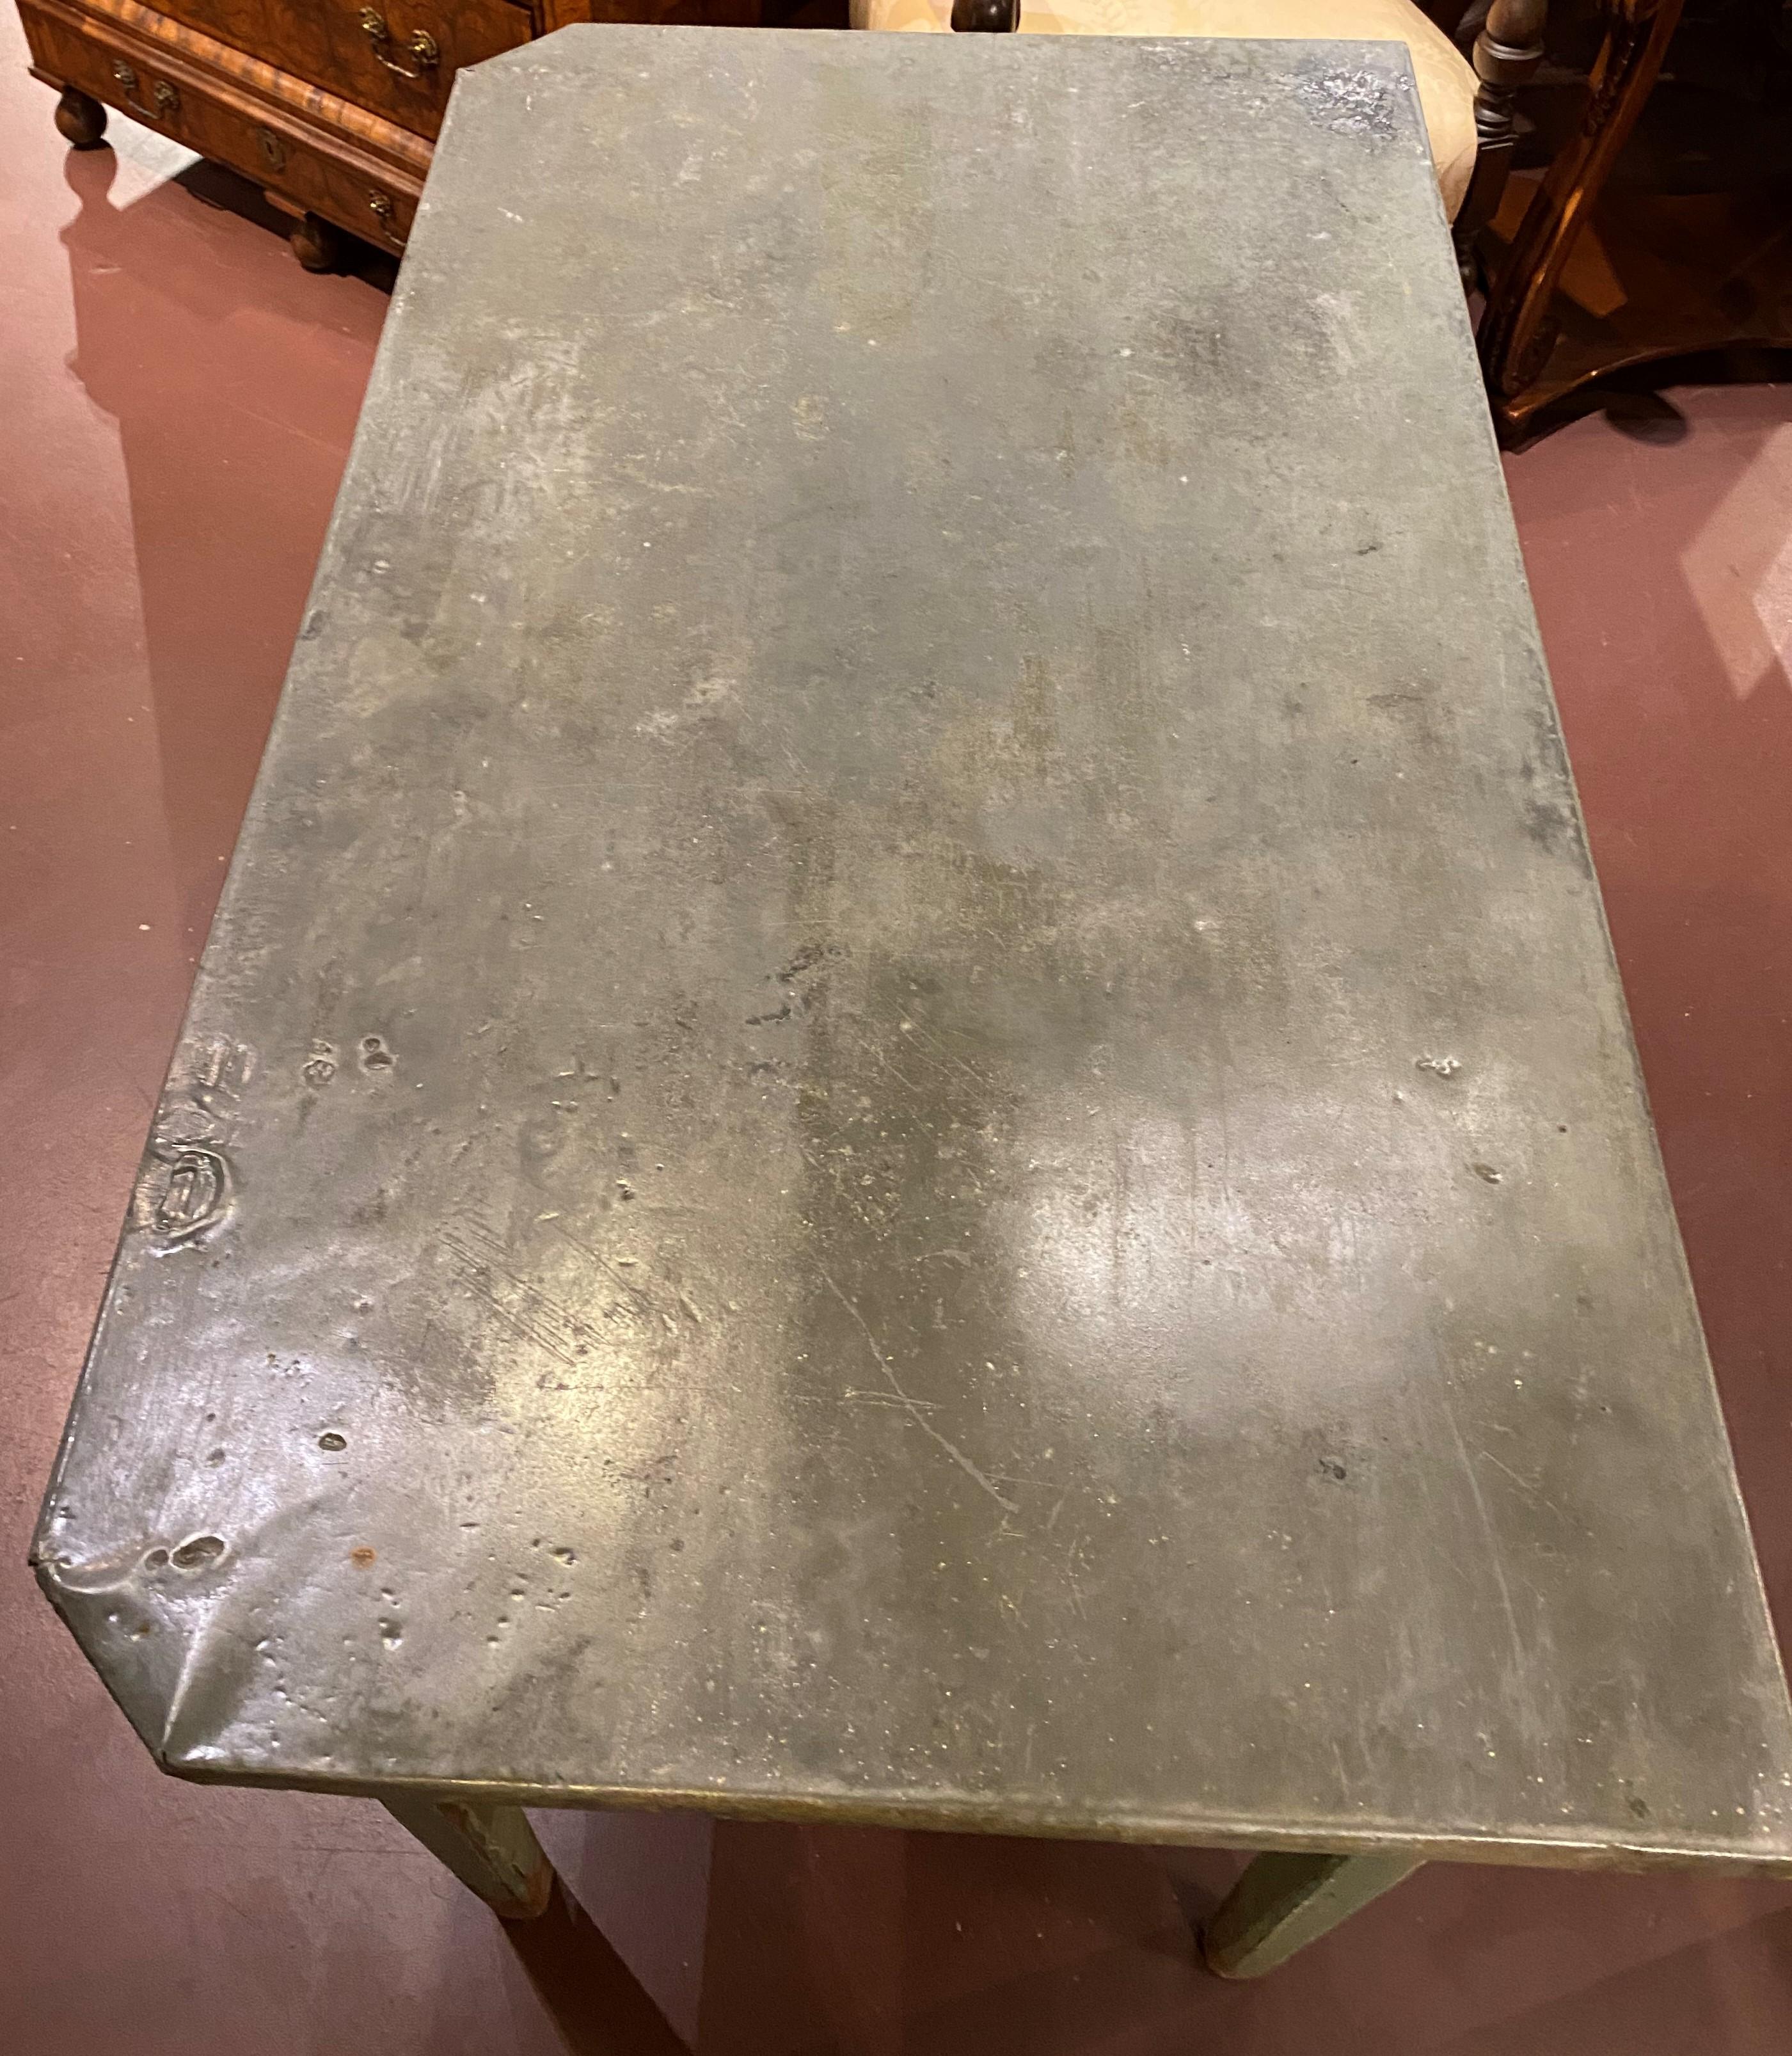 A fabulous zinc top flower or garden table in green over yellow paint with canted top corners, and a single divided frieze drawer, all supported by four tapered square legs. This table dates to the late 19th or early 20th century and is in very good